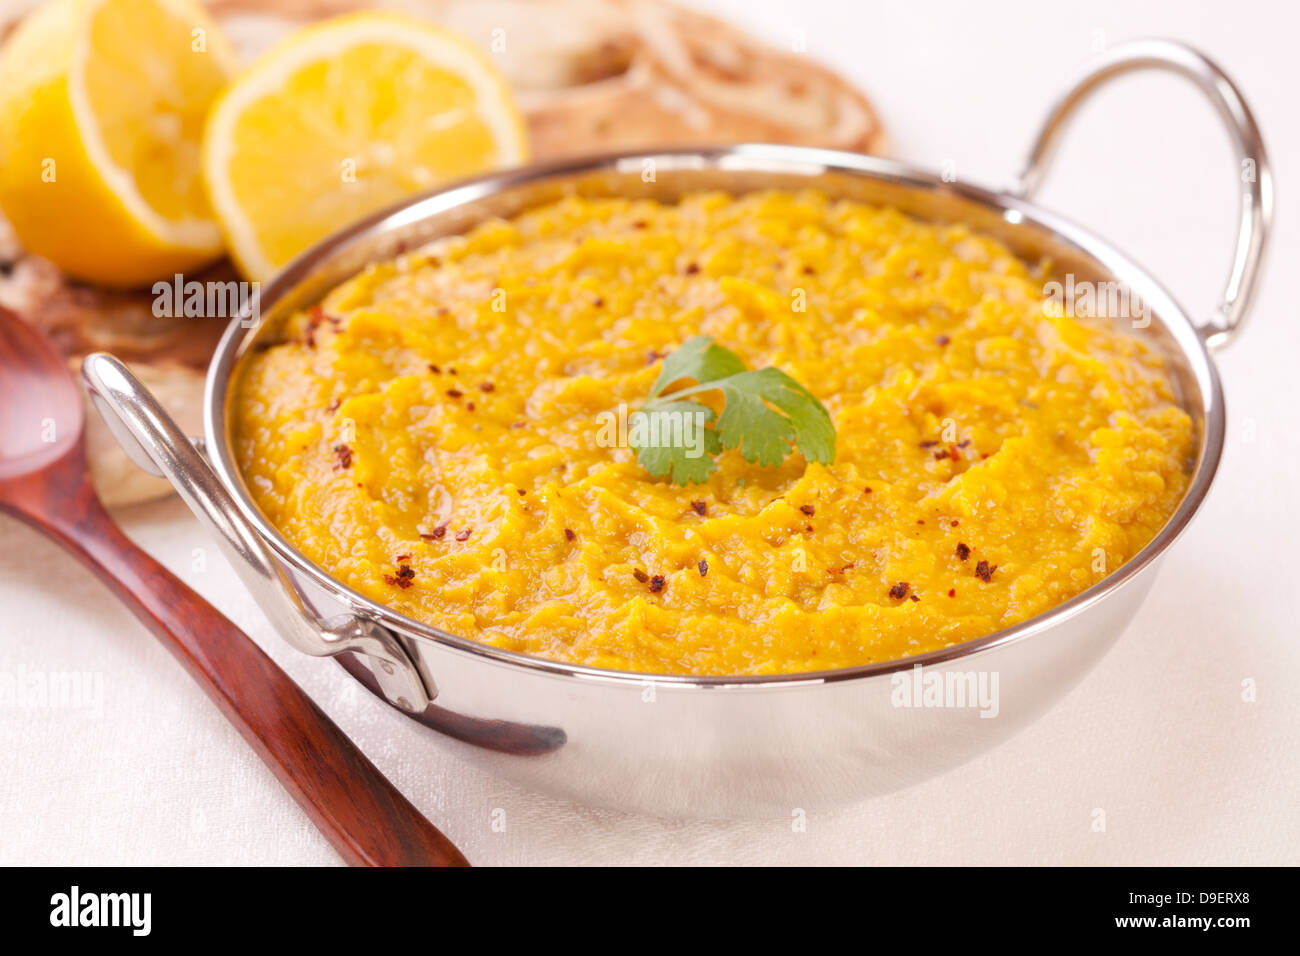 Dhal Indian Food - a balti dish filled with tasty Indian dhal or dal, with naan bread and lemon in the background. Stock Photo